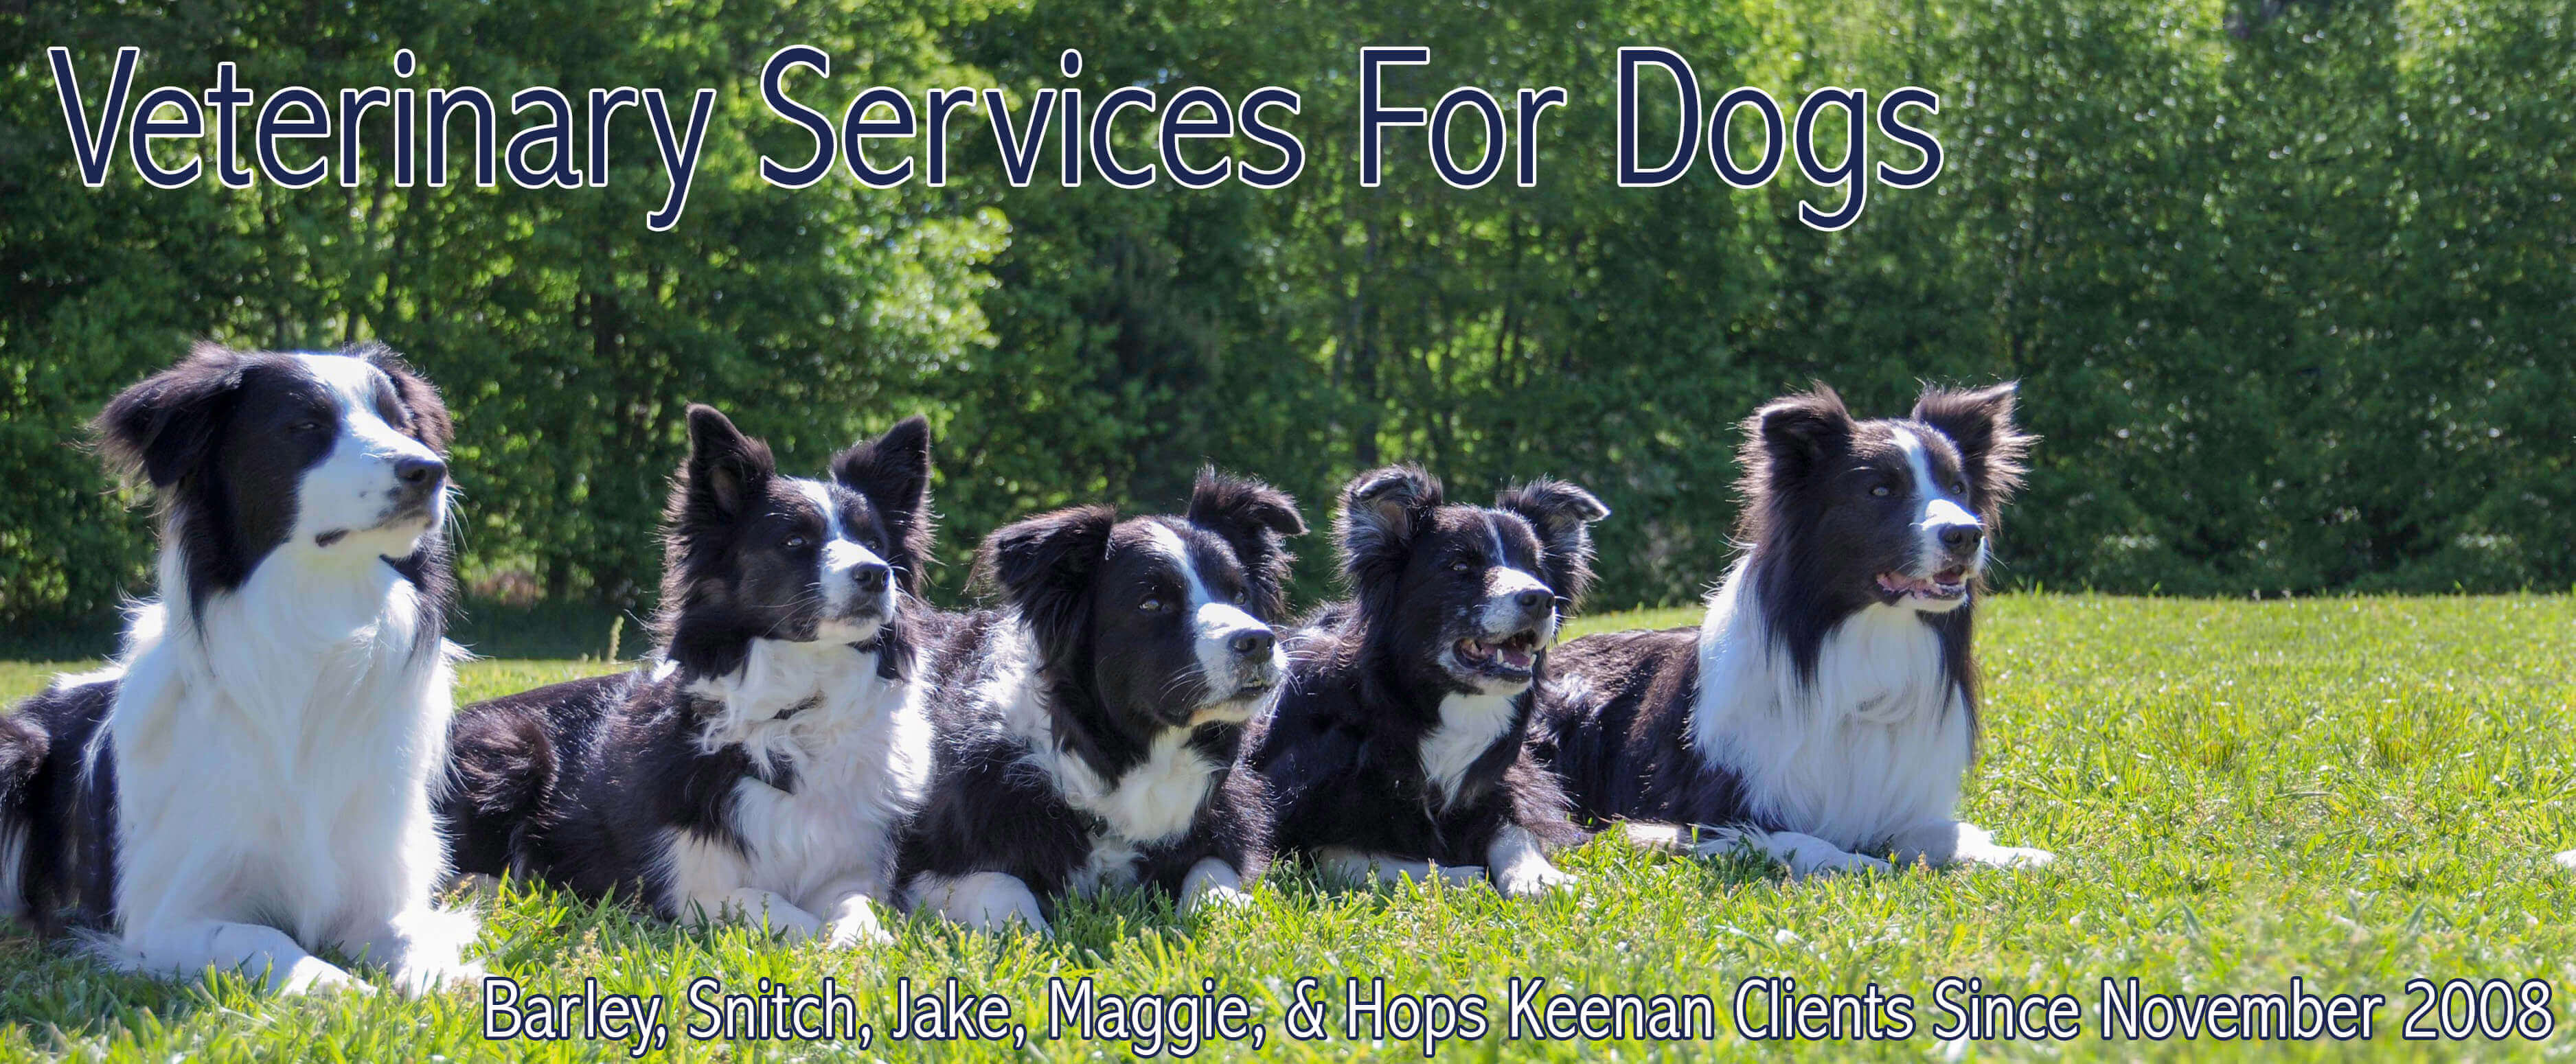 Dog Vet Services From Veterinarians Who Really Care